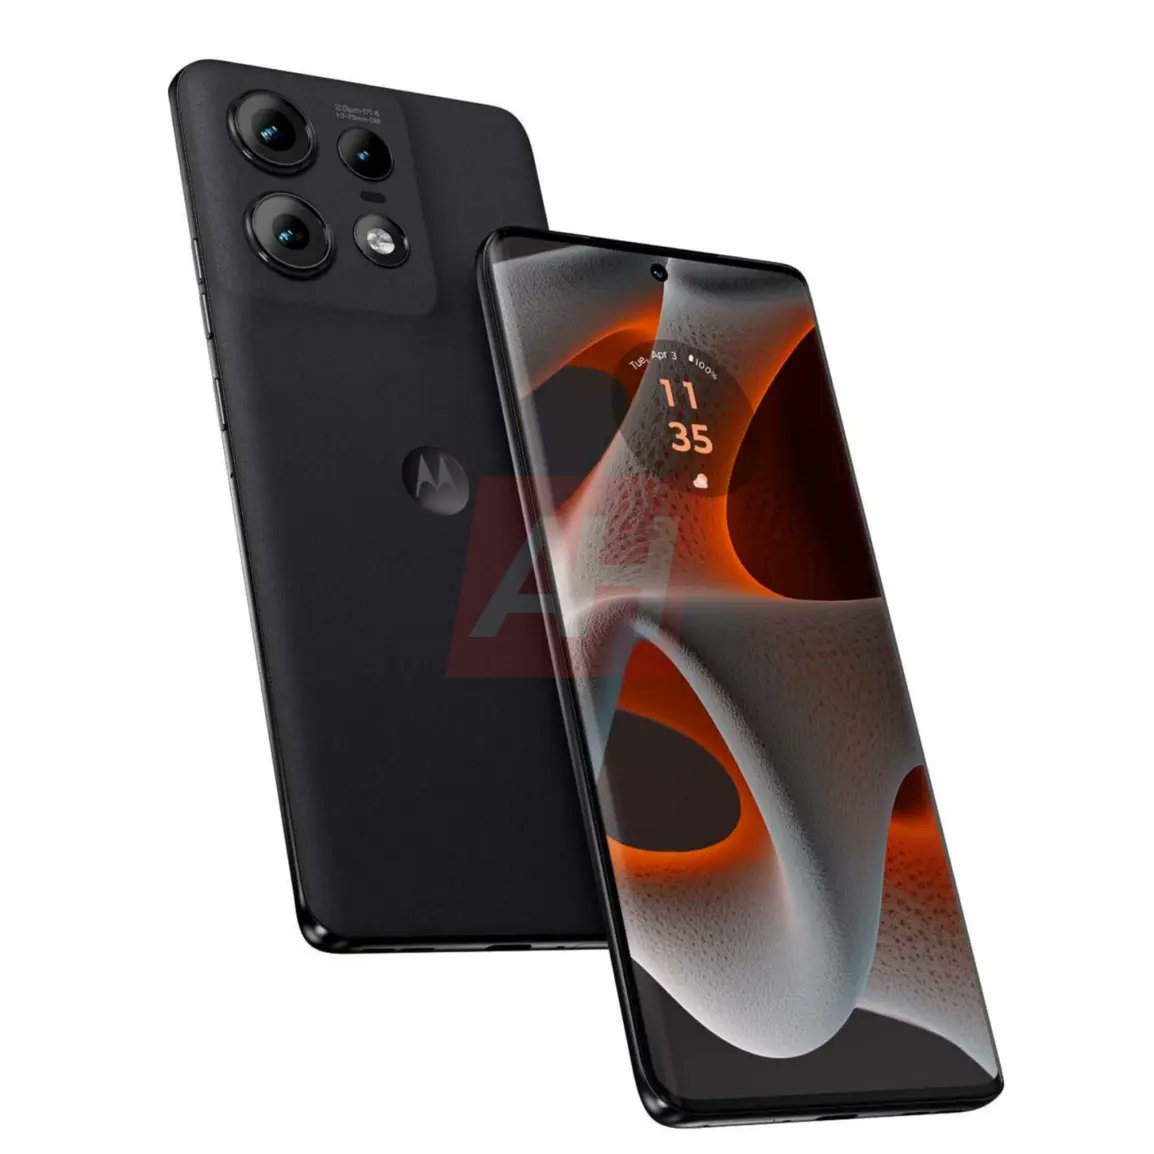 Motorola Edge 50 Pro

> 50 MP f/1.4 main sensor
> 6.7' screen with 165 Hz refresh rate
> Snapdragon 8 Gen 3
> 4,500 mAh battery with support for 125W wired and 50W wireless charging

#MotorolaEdge50Pro #moto #MotorolaMagicMoment #motorola #moto